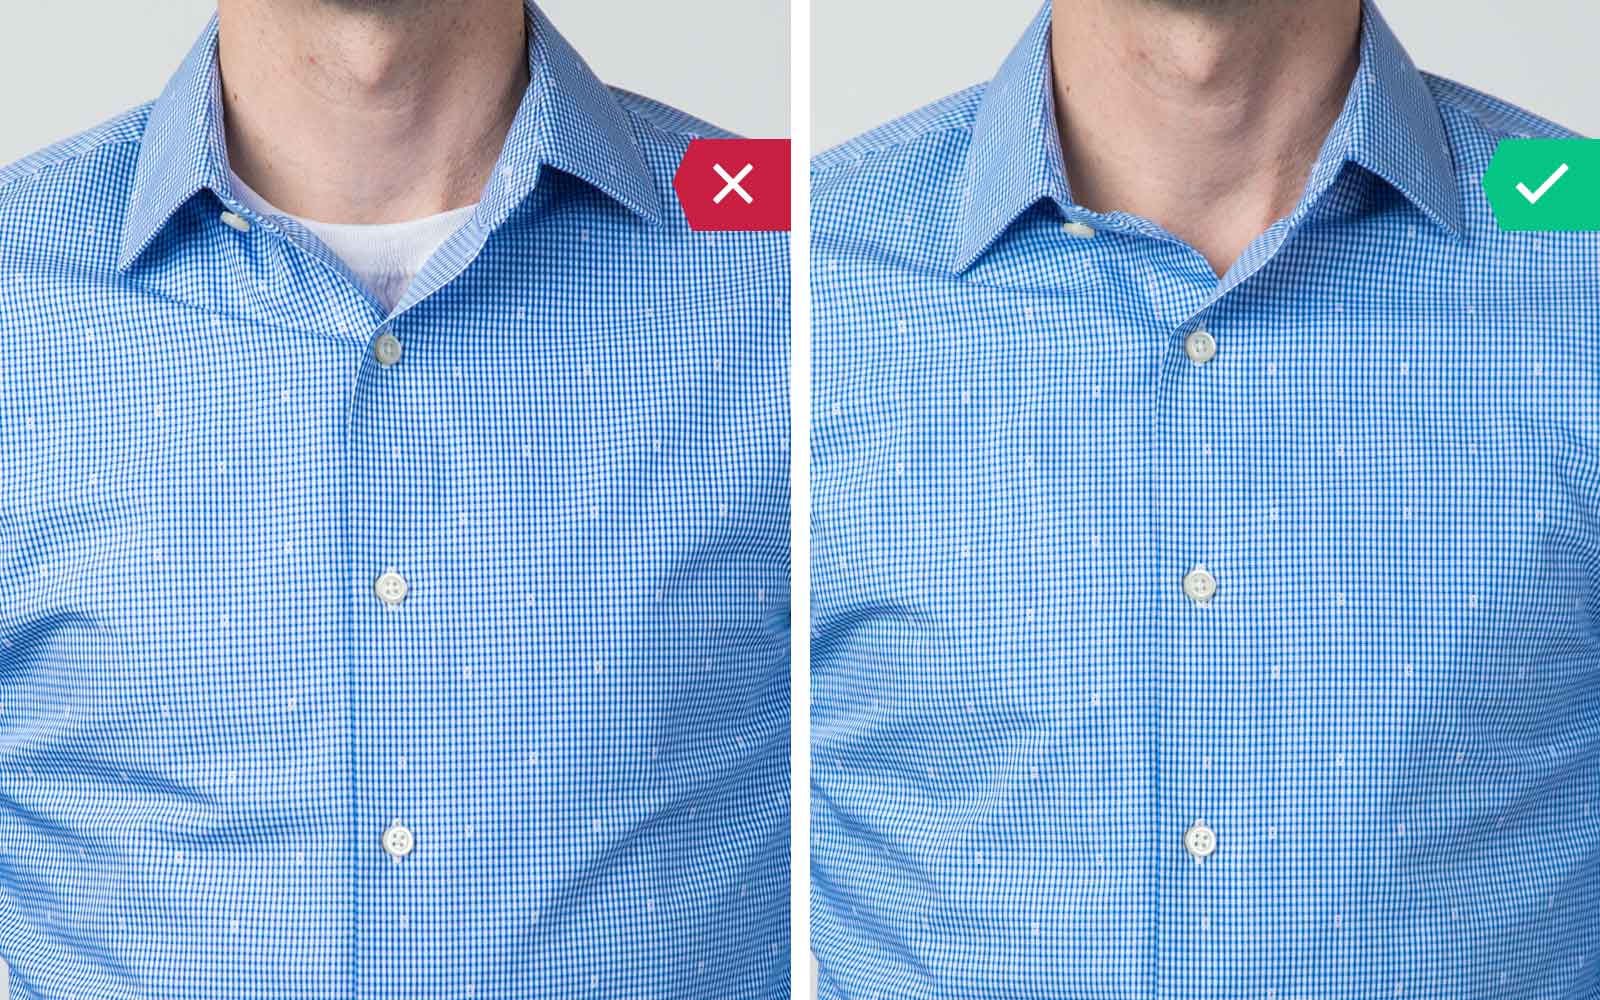 Visible-Undershirt-While-Wearing-a-Dress-Shirt - 27 Things Male Realtors Should Never, Ever, Wear to Work